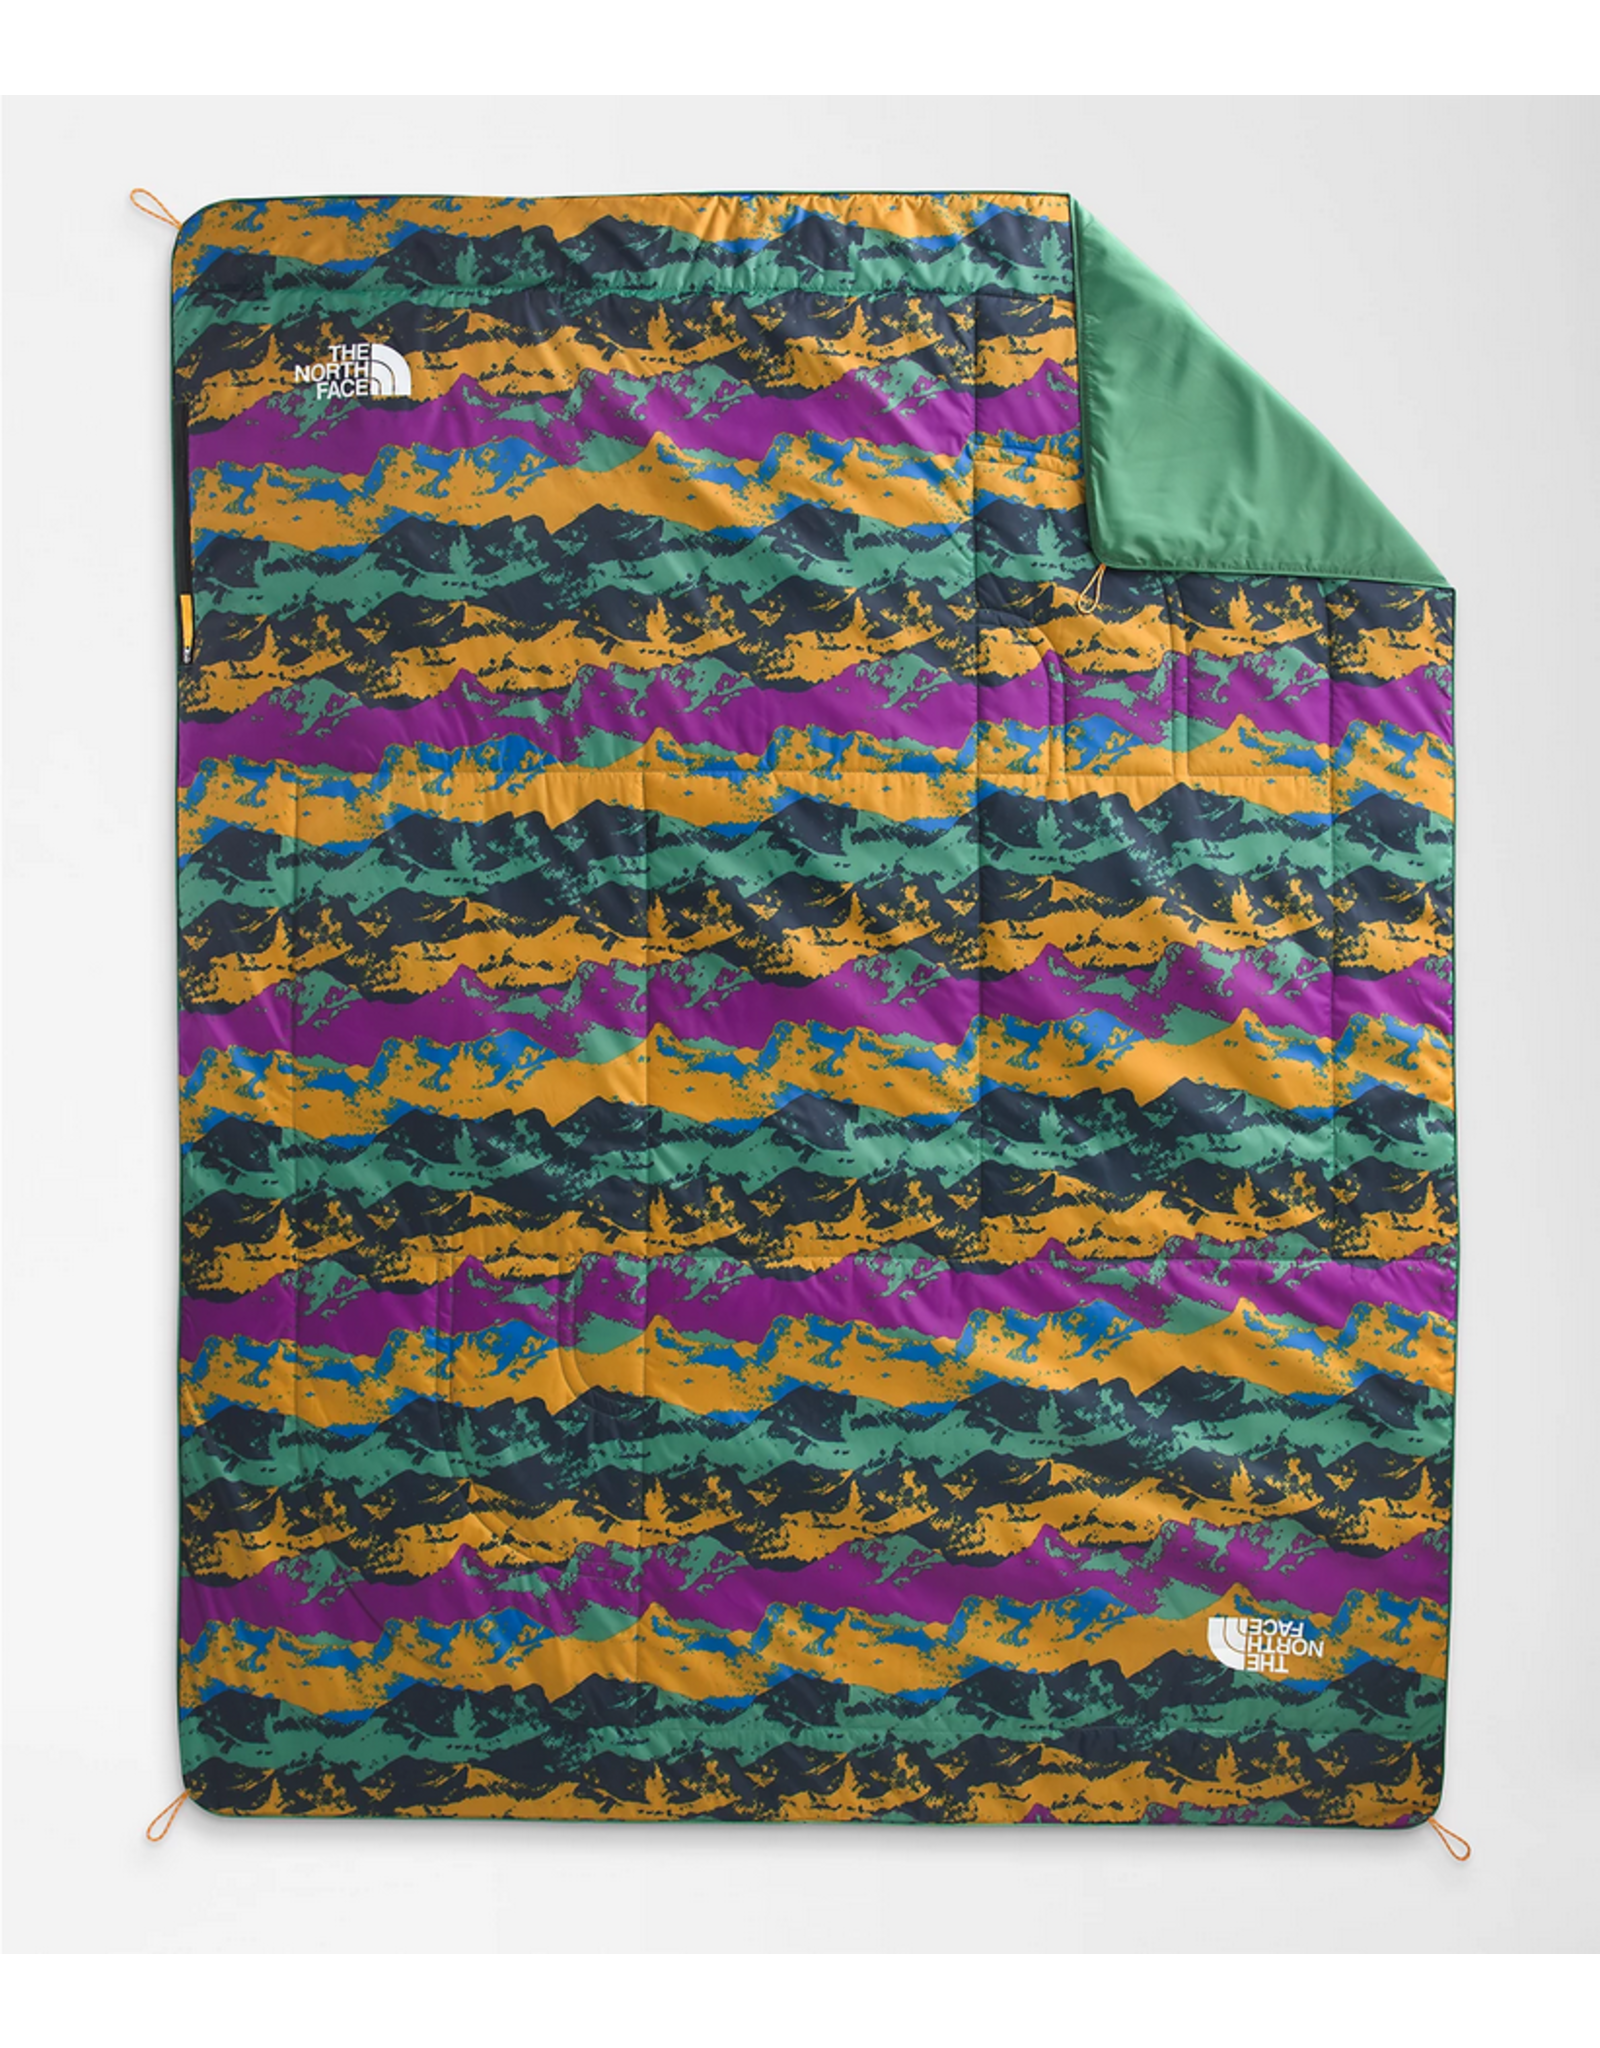 THE NORTH FACE WAWONA BLANKET